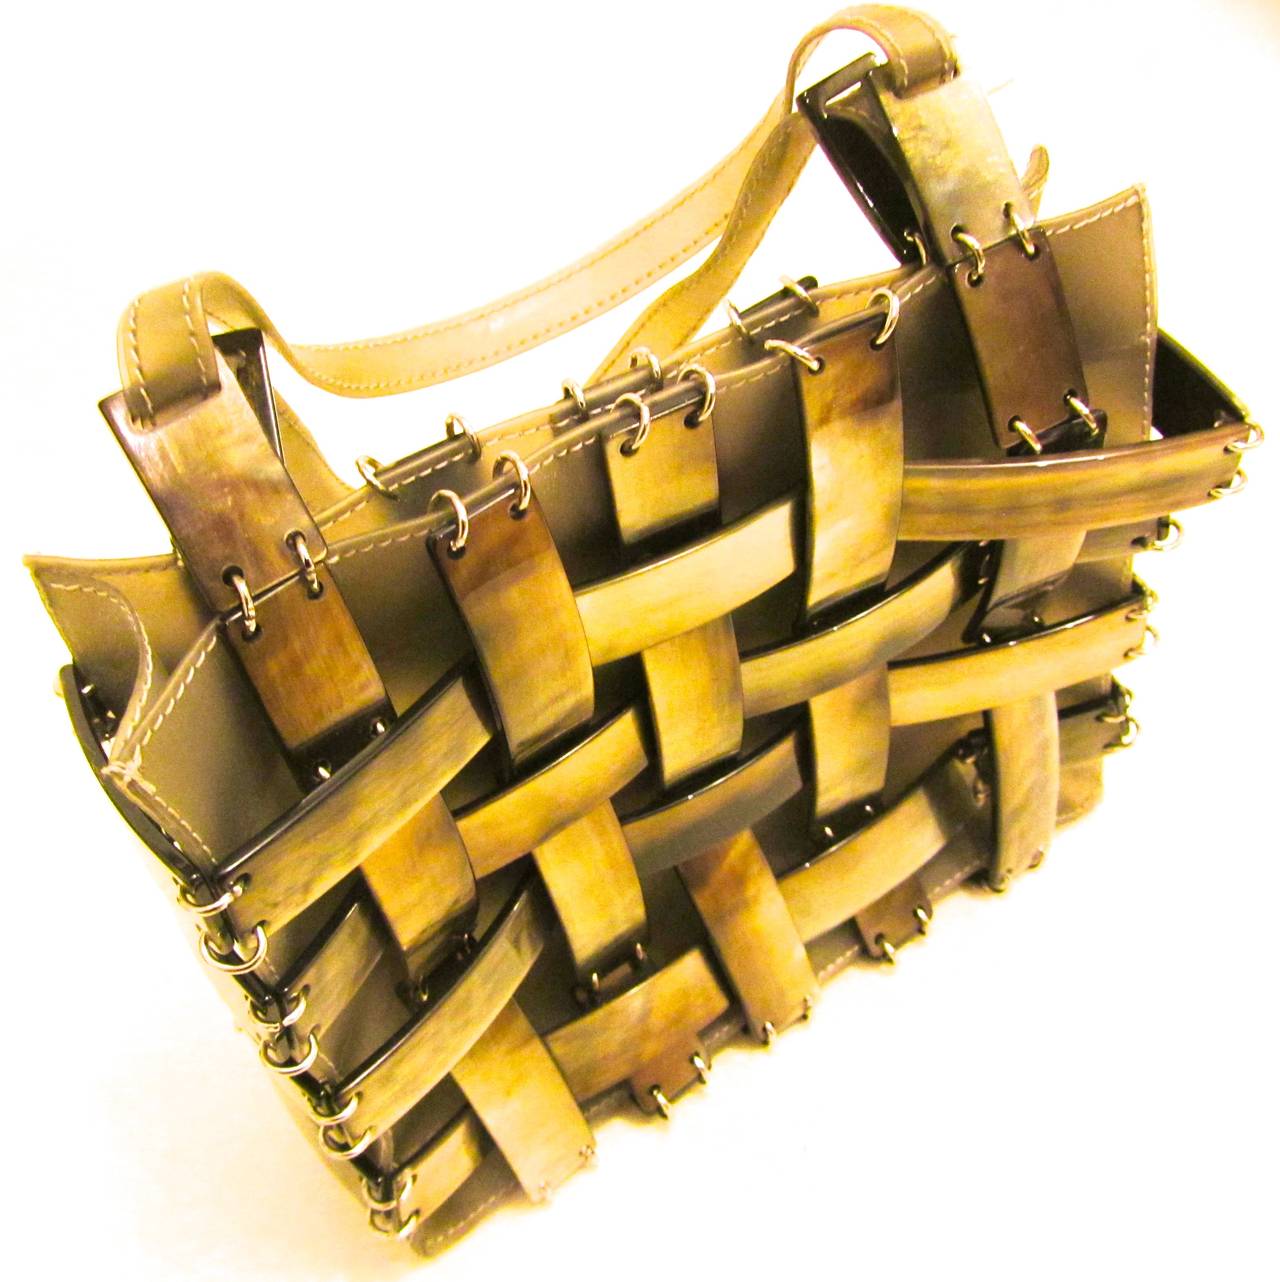 This beautiful Bottega Veneta handbag has never been used. It is from the 1980's. It is woven mother of pearl over a clear plastic lining attached by grommets. It is extremely rare and perfect for any occasion. 

5 inche strap drop.